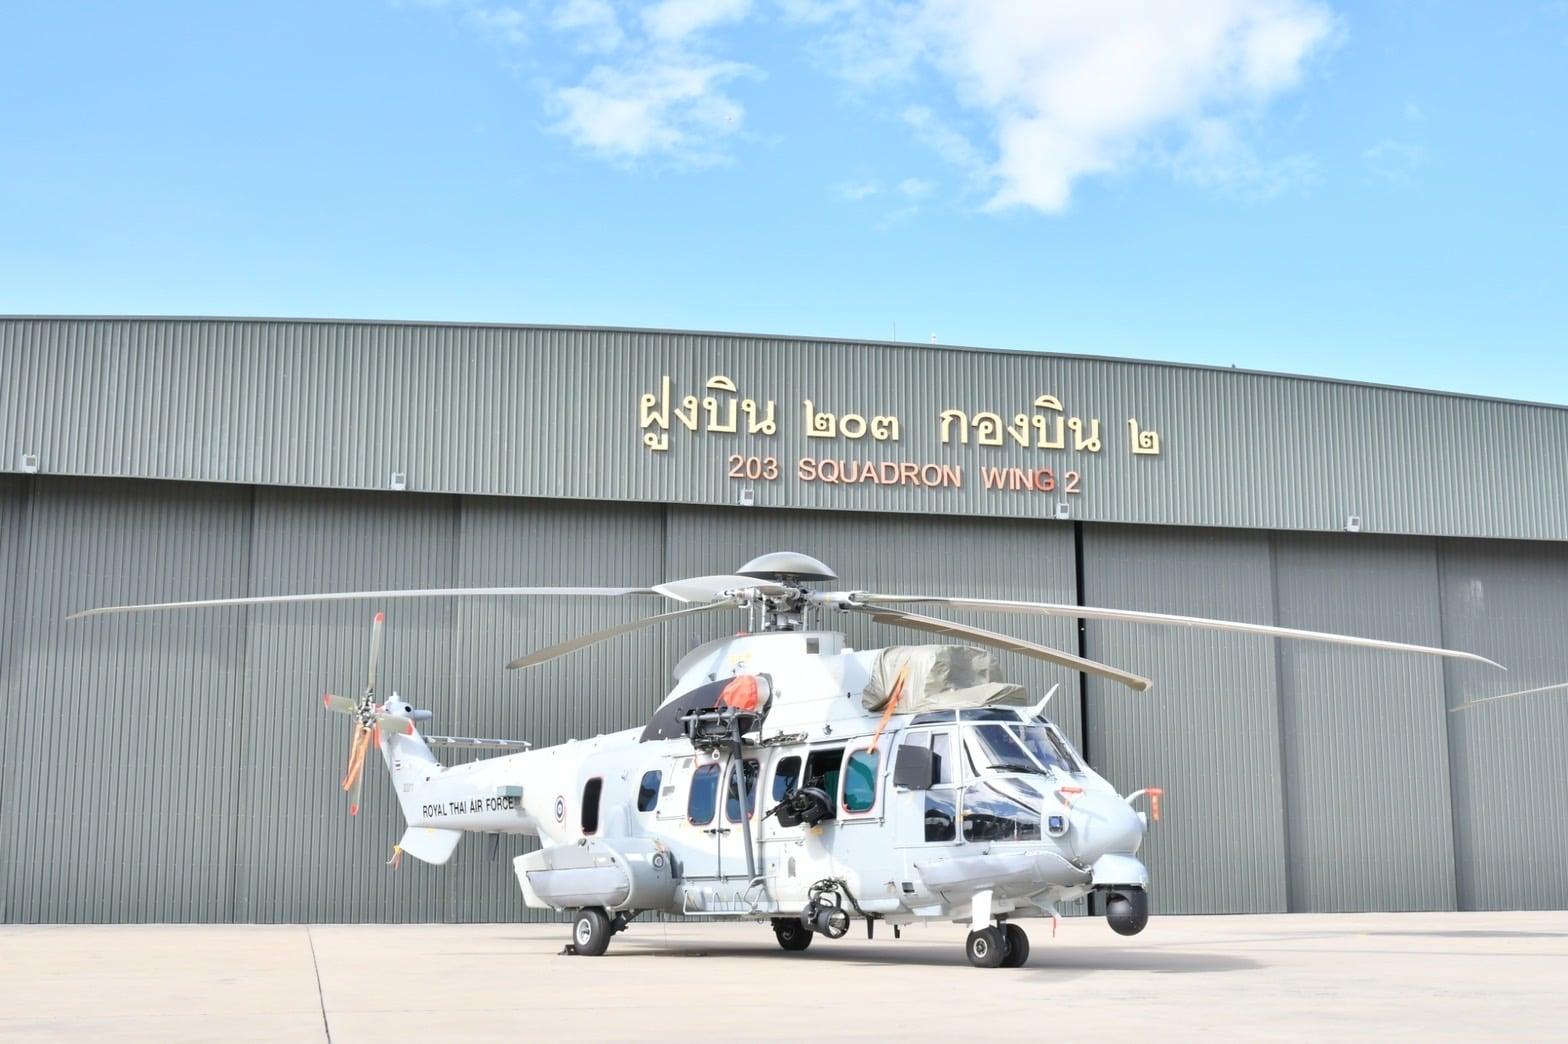 Royal Thai Air Force Takes Delivery of New Airbus H225M Tactical Transport Helicopters